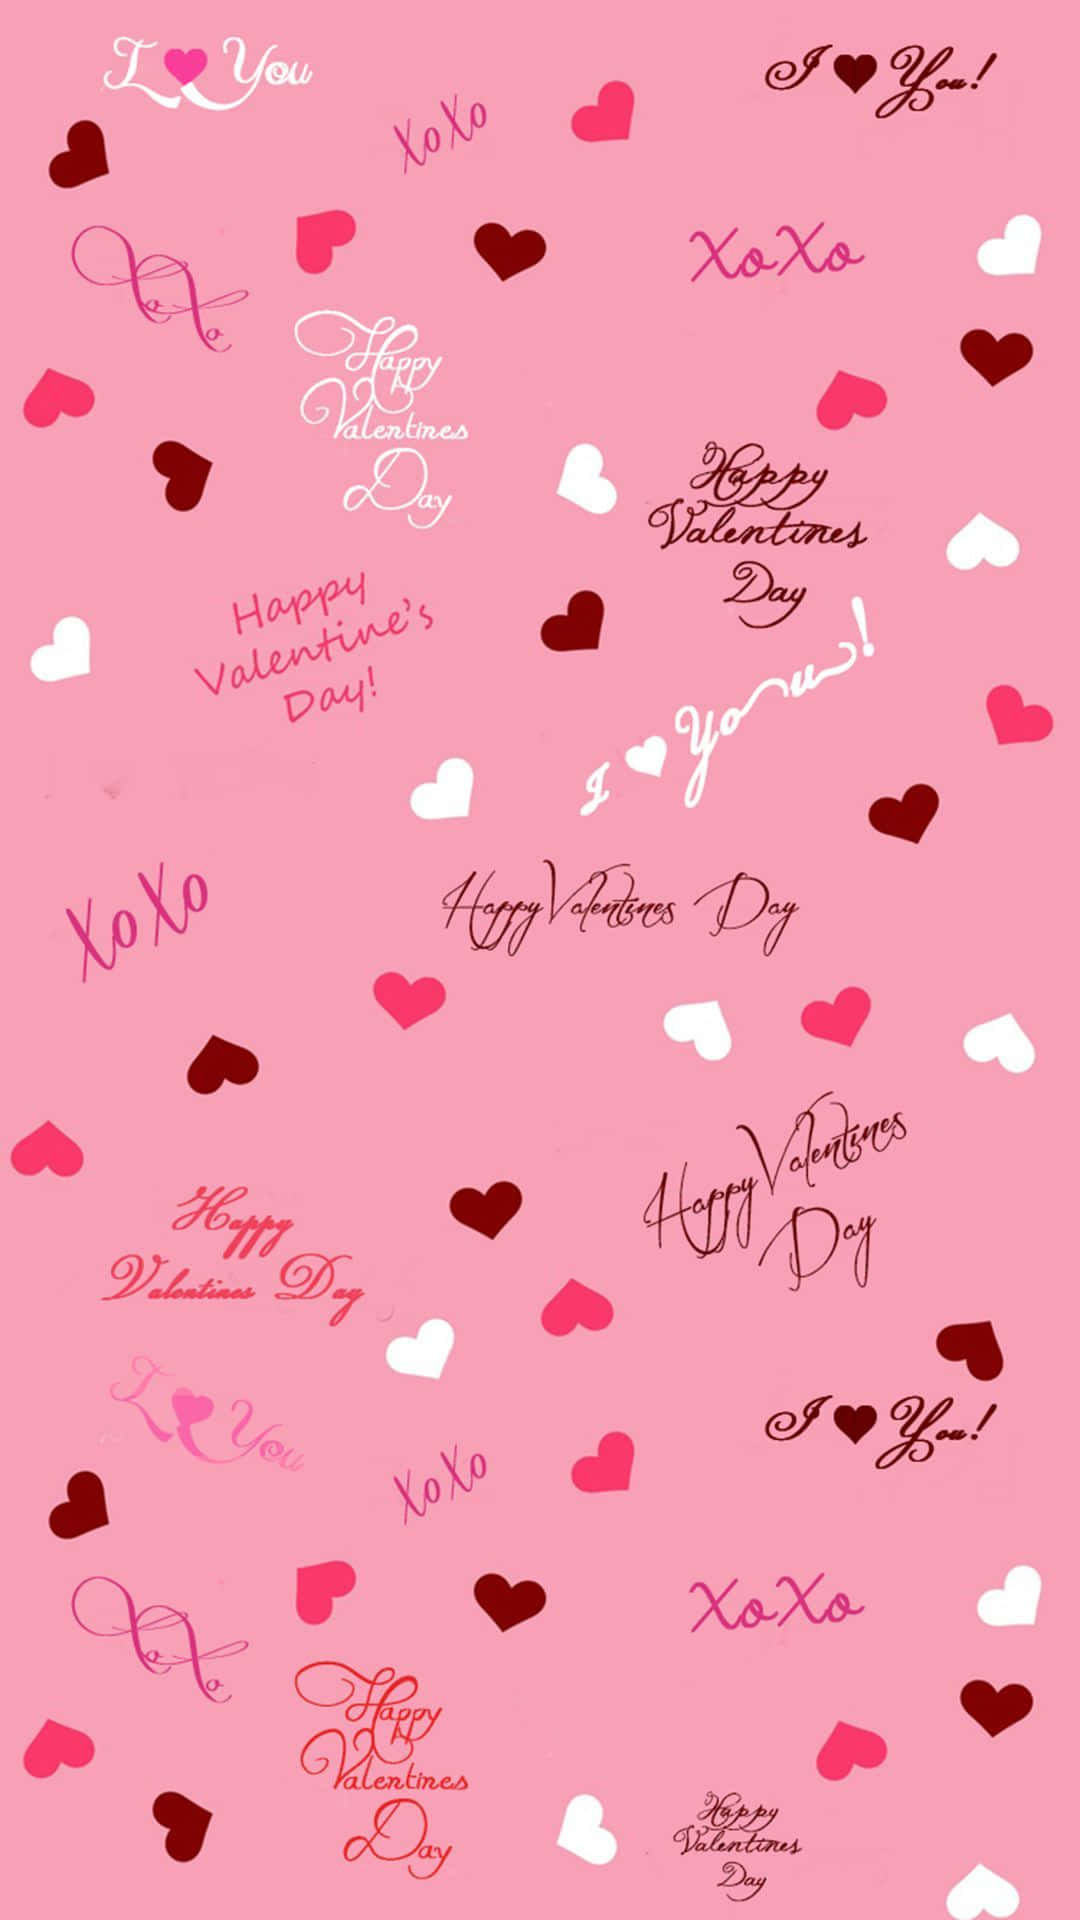 Valentine's Day Wallpapers - Wallpapers For Valentine's Day Wallpaper